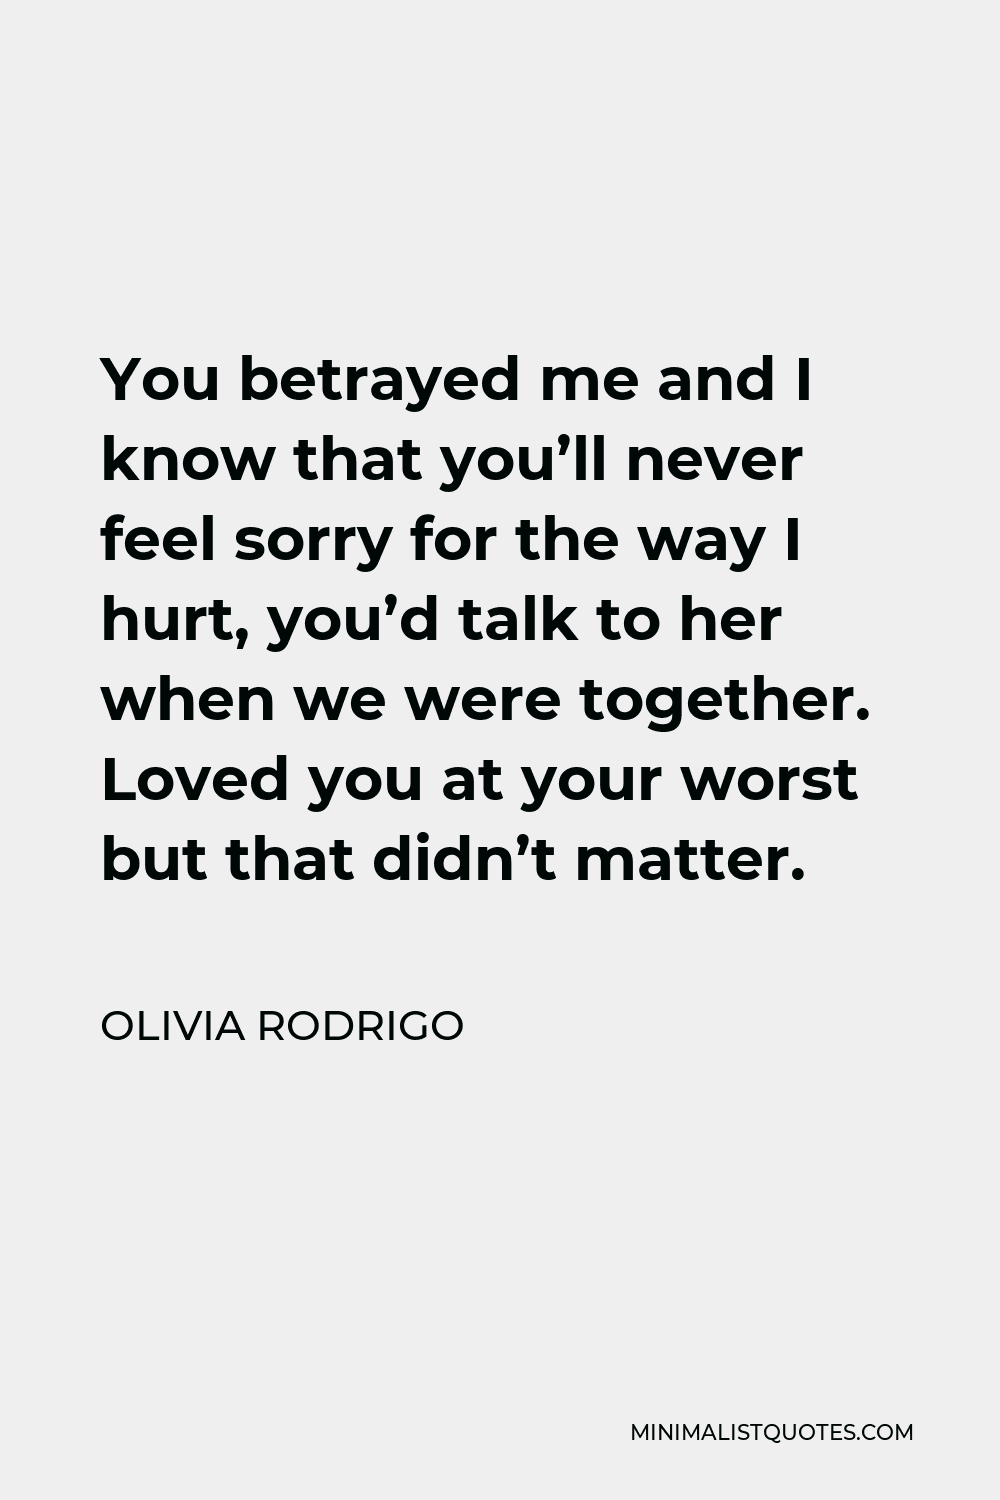 Olivia Rodrigo Quote - You betrayed me and I know that you’ll never feel sorry for the way I hurt, you’d talk to her when we were together. Loved you at your worst but that didn’t matter.